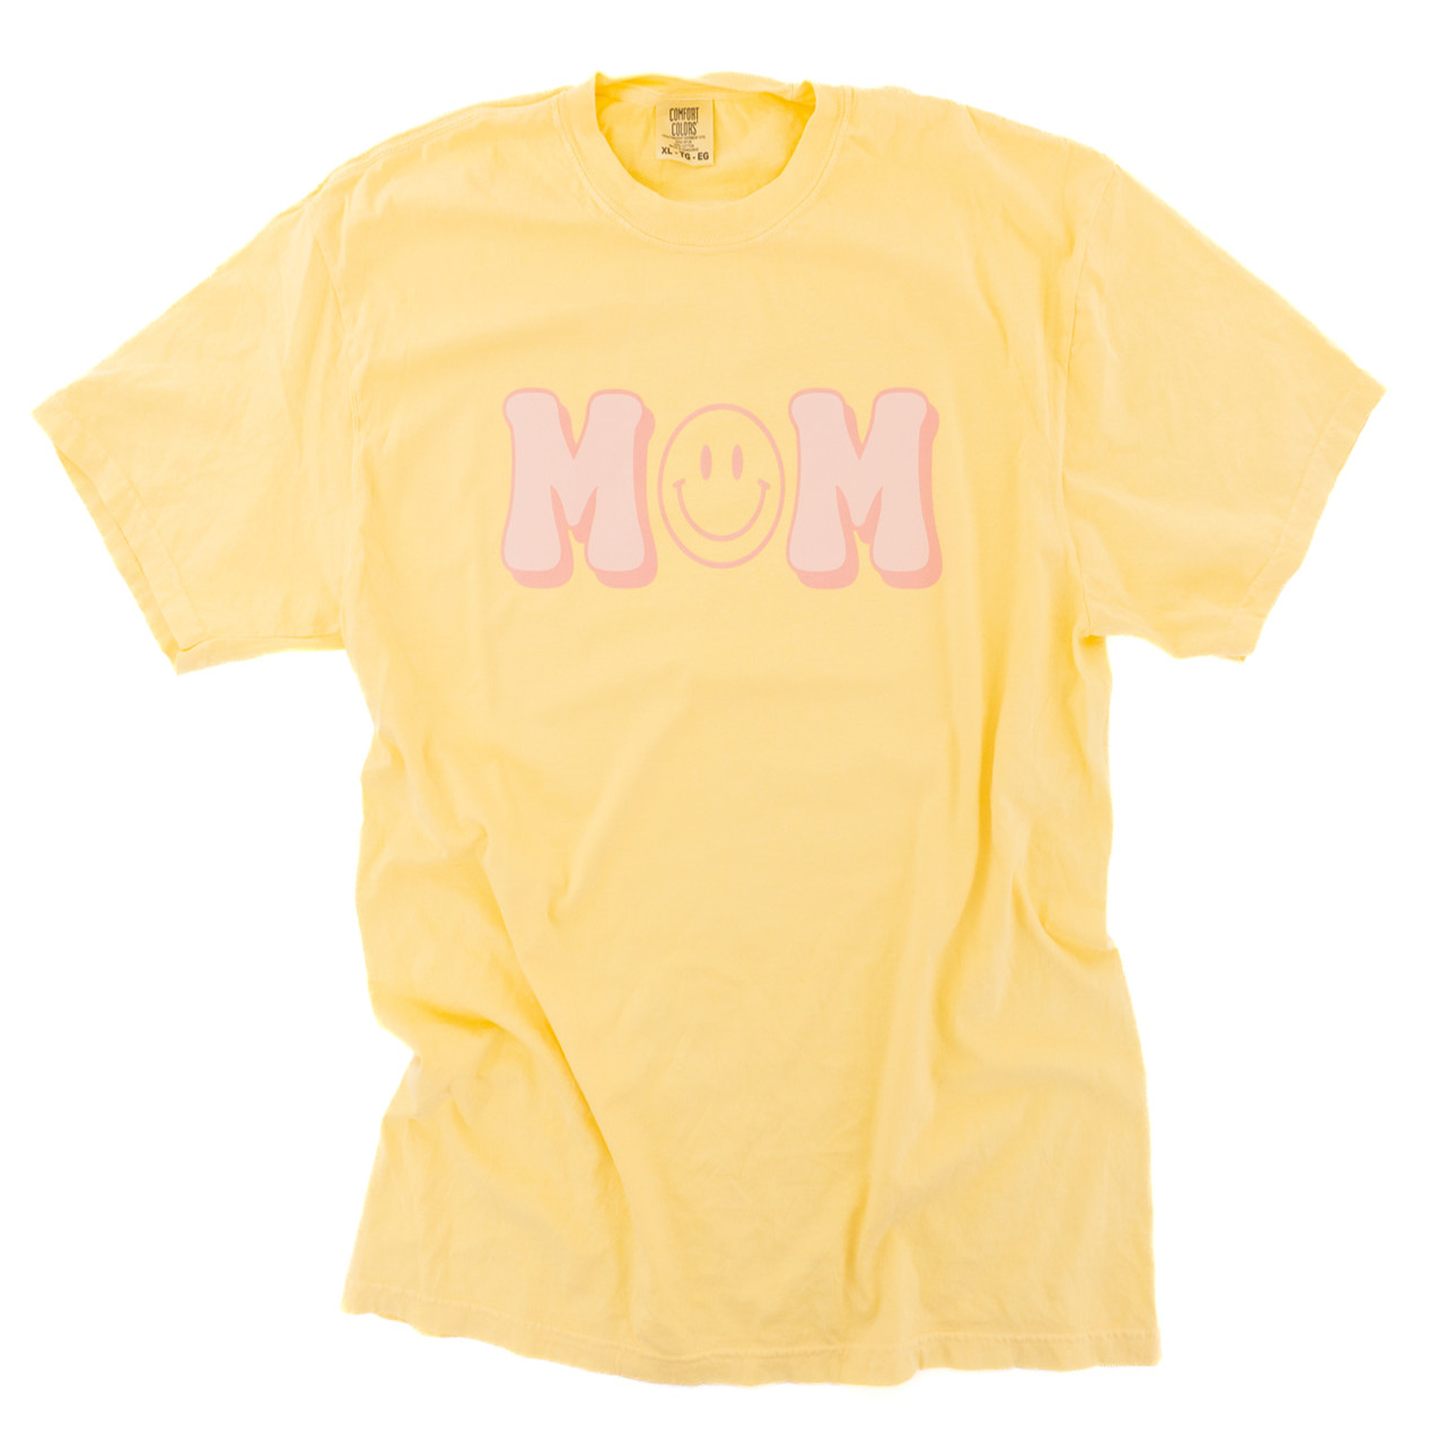 MOM Smiley (Across Front) - Tee (Pale Yellow)